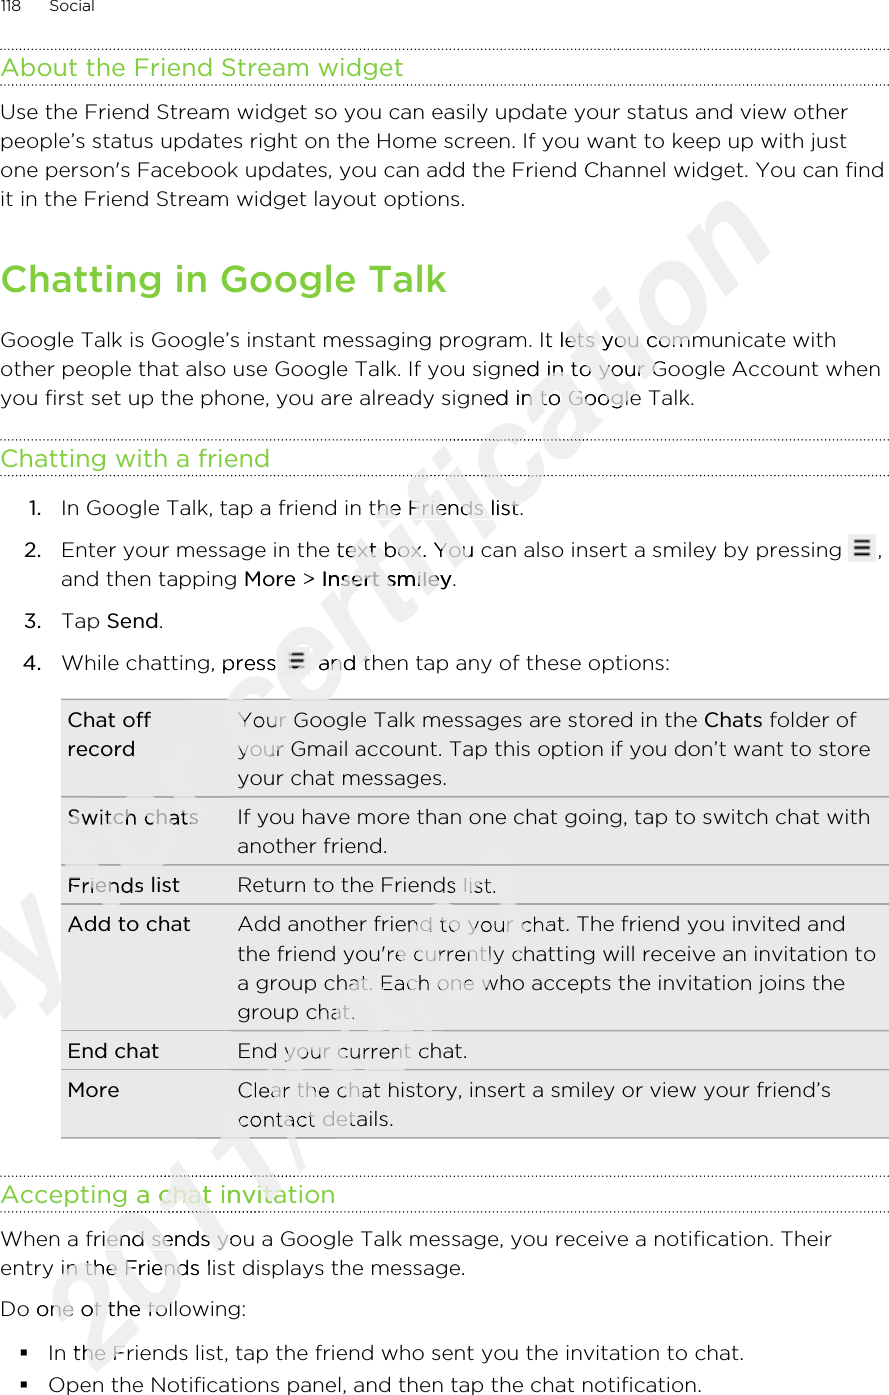 About the Friend Stream widgetUse the Friend Stream widget so you can easily update your status and view otherpeople’s status updates right on the Home screen. If you want to keep up with justone person&apos;s Facebook updates, you can add the Friend Channel widget. You can findit in the Friend Stream widget layout options.Chatting in Google TalkGoogle Talk is Google’s instant messaging program. It lets you communicate withother people that also use Google Talk. If you signed in to your Google Account whenyou first set up the phone, you are already signed in to Google Talk.Chatting with a friend1. In Google Talk, tap a friend in the Friends list.2. Enter your message in the text box. You can also insert a smiley by pressing  ,and then tapping More &gt; Insert smiley.3. Tap Send.4. While chatting, press   and then tap any of these options:Chat offrecordYour Google Talk messages are stored in the Chats folder ofyour Gmail account. Tap this option if you don’t want to storeyour chat messages.Switch chats If you have more than one chat going, tap to switch chat withanother friend.Friends list Return to the Friends list.Add to chat Add another friend to your chat. The friend you invited andthe friend you&apos;re currently chatting will receive an invitation toa group chat. Each one who accepts the invitation joins thegroup chat.End chat End your current chat.More Clear the chat history, insert a smiley or view your friend’scontact details.Accepting a chat invitationWhen a friend sends you a Google Talk message, you receive a notification. Theirentry in the Friends list displays the message.Do one of the following:§In the Friends list, tap the friend who sent you the invitation to chat.§Open the Notifications panel, and then tap the chat notification.118 SocialOnly Only Add to chatOnly Add to chatfor for recordfor recordSwitch chatsfor Switch chatsFriends listfor Friends listAdd to chatfor Add to chatfor for for for certification one person&apos;s Facebook updates, you can add the Friend Channel widget. You can findcertification one person&apos;s Facebook updates, you can add the Friend Channel widget. You can findGoogle Talk is Google’s instant messaging program. It lets you communicate withcertification Google Talk is Google’s instant messaging program. It lets you communicate withother people that also use Google Talk. If you signed in to your Google Account whencertification other people that also use Google Talk. If you signed in to your Google Account whenyou first set up the phone, you are already signed in to Google Talk.certification you first set up the phone, you are already signed in to Google Talk.certification certification In Google Talk, tap a friend in the Friends list.certification In Google Talk, tap a friend in the Friends list.Enter your message in the text box. You can also insert a smiley by pressing certification Enter your message in the text box. You can also insert a smiley by pressing  &gt; certification  &gt; Insert smileycertification Insert smileyWhile chatting, press certification While chatting, press certification  and then tap any of these options:certification  and then tap any of these options:certification Your Google Talk messages are stored in the certification Your Google Talk messages are stored in the your Gmail account. Tap this option if you don’t want to storecertification your Gmail account. Tap this option if you don’t want to storecertification certification 2011/03/072011/03/07Return to the Friends list.2011/03/07Return to the Friends list.Add another friend to your chat. The friend you invited and2011/03/07Add another friend to your chat. The friend you invited andthe friend you&apos;re currently chatting will receive an invitation to2011/03/07the friend you&apos;re currently chatting will receive an invitation toa group chat. Each one who accepts the invitation joins the2011/03/07a group chat. Each one who accepts the invitation joins thegroup chat.2011/03/07group chat.End your current chat.2011/03/07End your current chat.Clear the chat history, insert a smiley or view your friend’s2011/03/07Clear the chat history, insert a smiley or view your friend’scontact details.2011/03/07contact details.2011/03/072011/03/072011/03/072011/03/072011/03/072011/03/07Accepting a chat invitation2011/03/07Accepting a chat invitation2011/03/072011/03/072011/03/07When a friend sends you a Google Talk message, you receive a notification. Their2011/03/07When a friend sends you a Google Talk message, you receive a notification. Theirentry in the Friends list displays the message.2011/03/07entry in the Friends list displays the message.Do one of the following:2011/03/07Do one of the following:In the Friends list, tap the friend who sent you the invitation to chat.2011/03/07In the Friends list, tap the friend who sent you the invitation to chat.